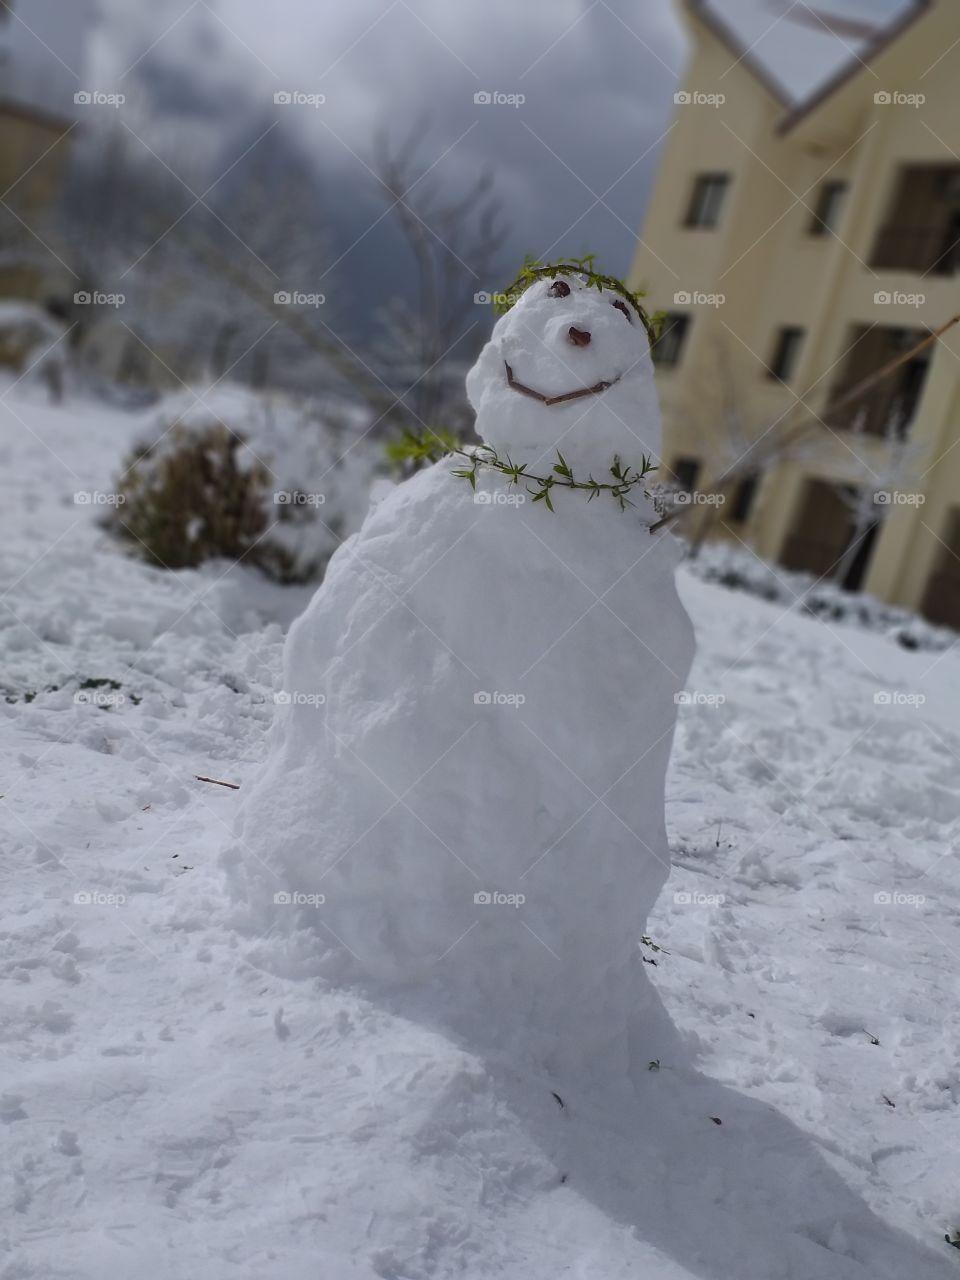 Snow man in Ifrane,Morocco